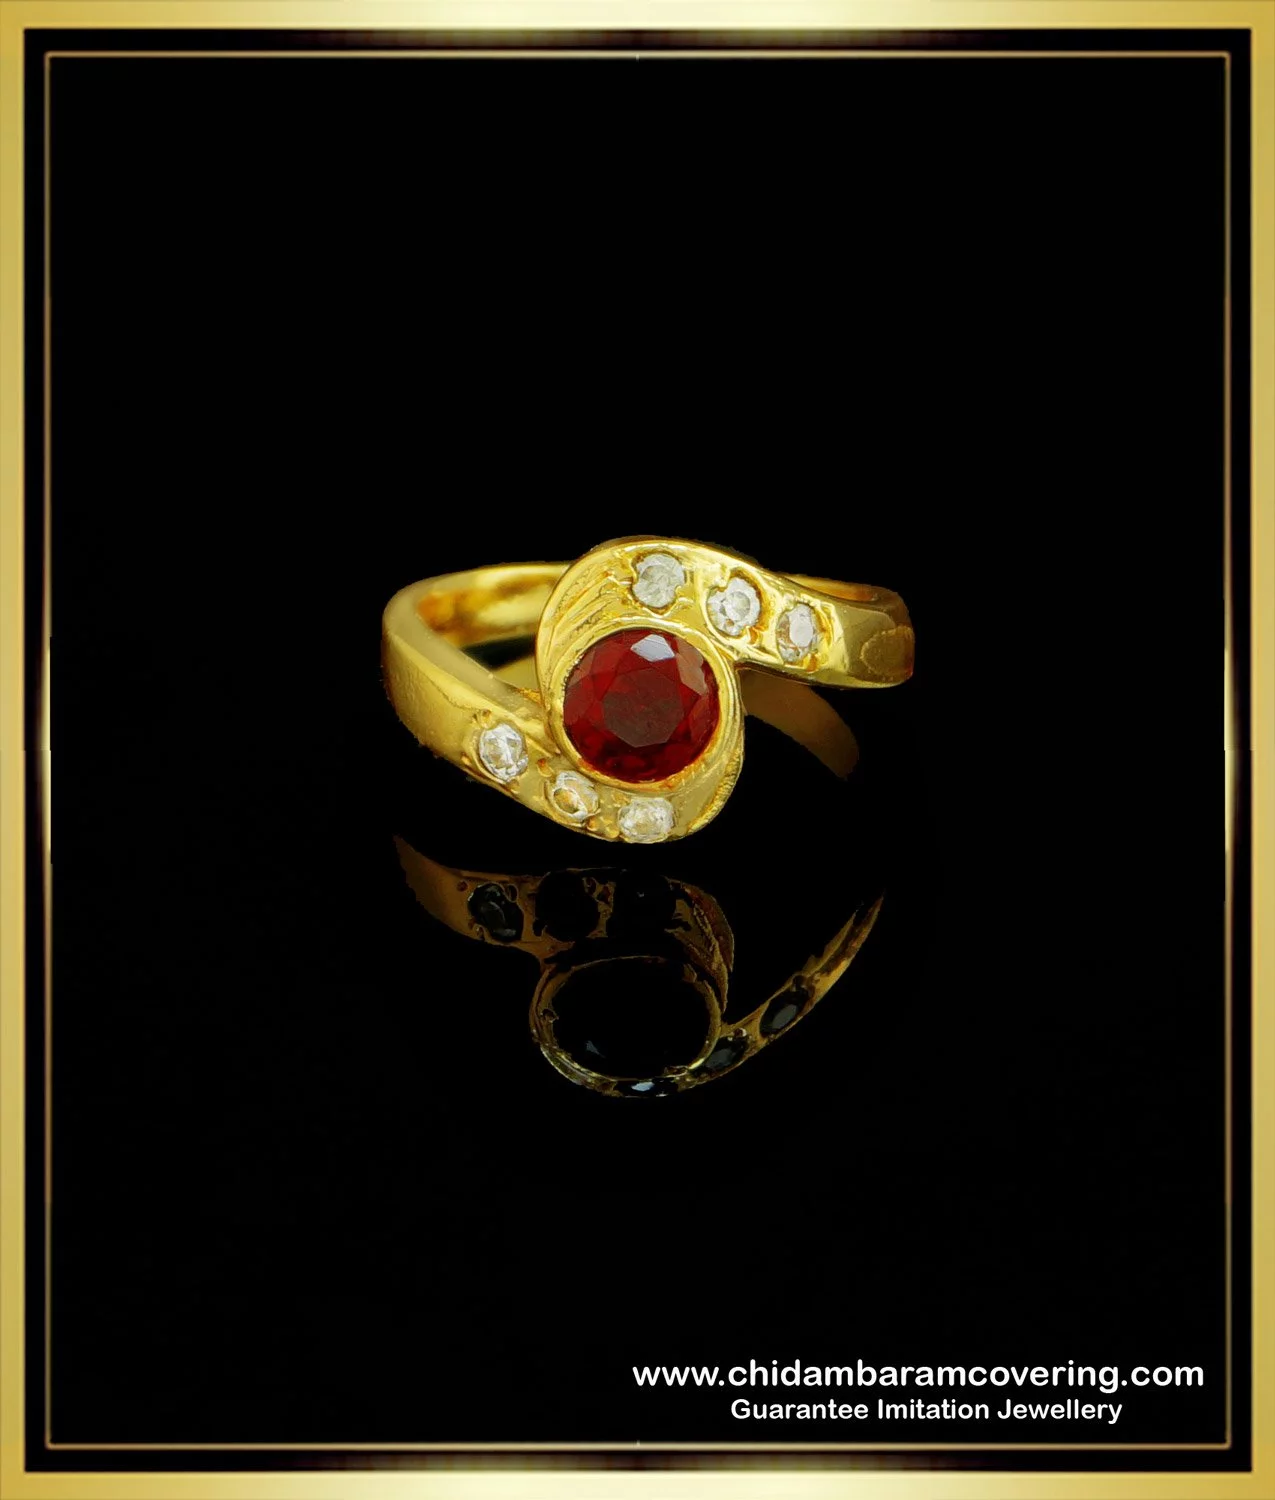 Buy quality Gold round single stone ring in Ahmedabad